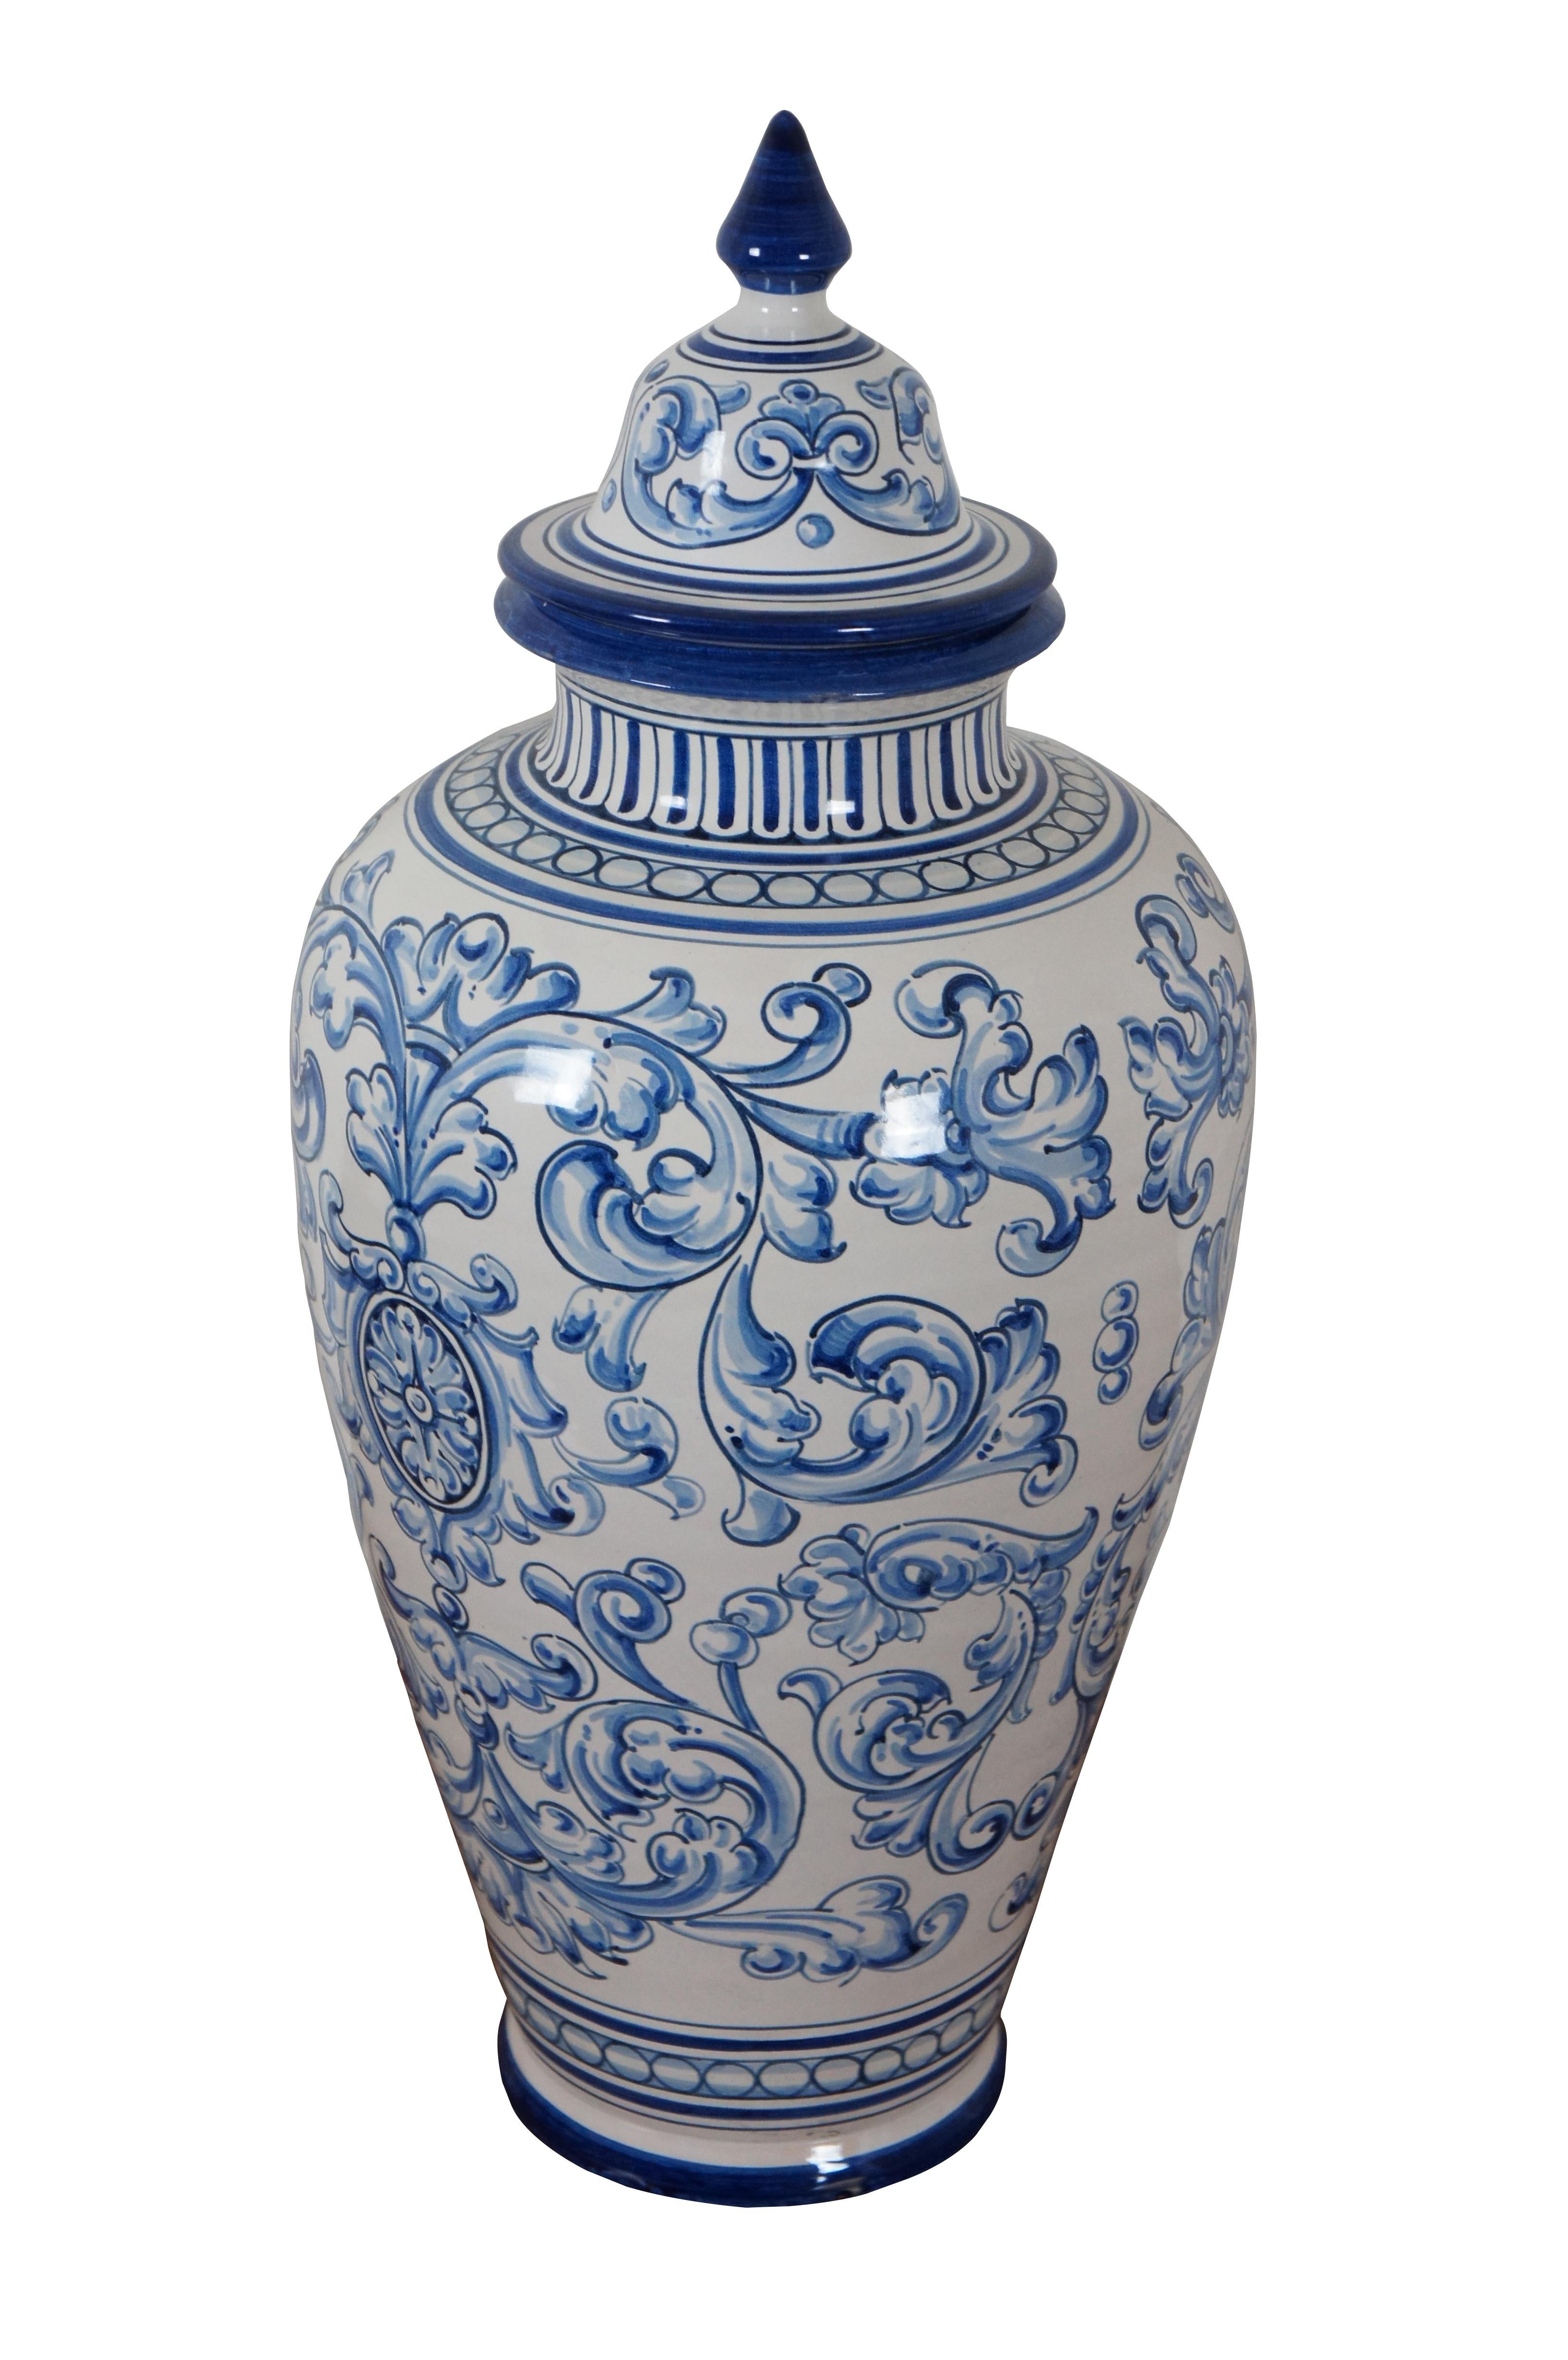 Vintage Spanish Talavera El Carmen folk art pottery, ceramic lidded mantel urn. Traditional urn shape beautifully decorated with blue and white foliate swirls and designs. Signed on base.

Dimensions:
10” x 21.5” (Diameter x Height)